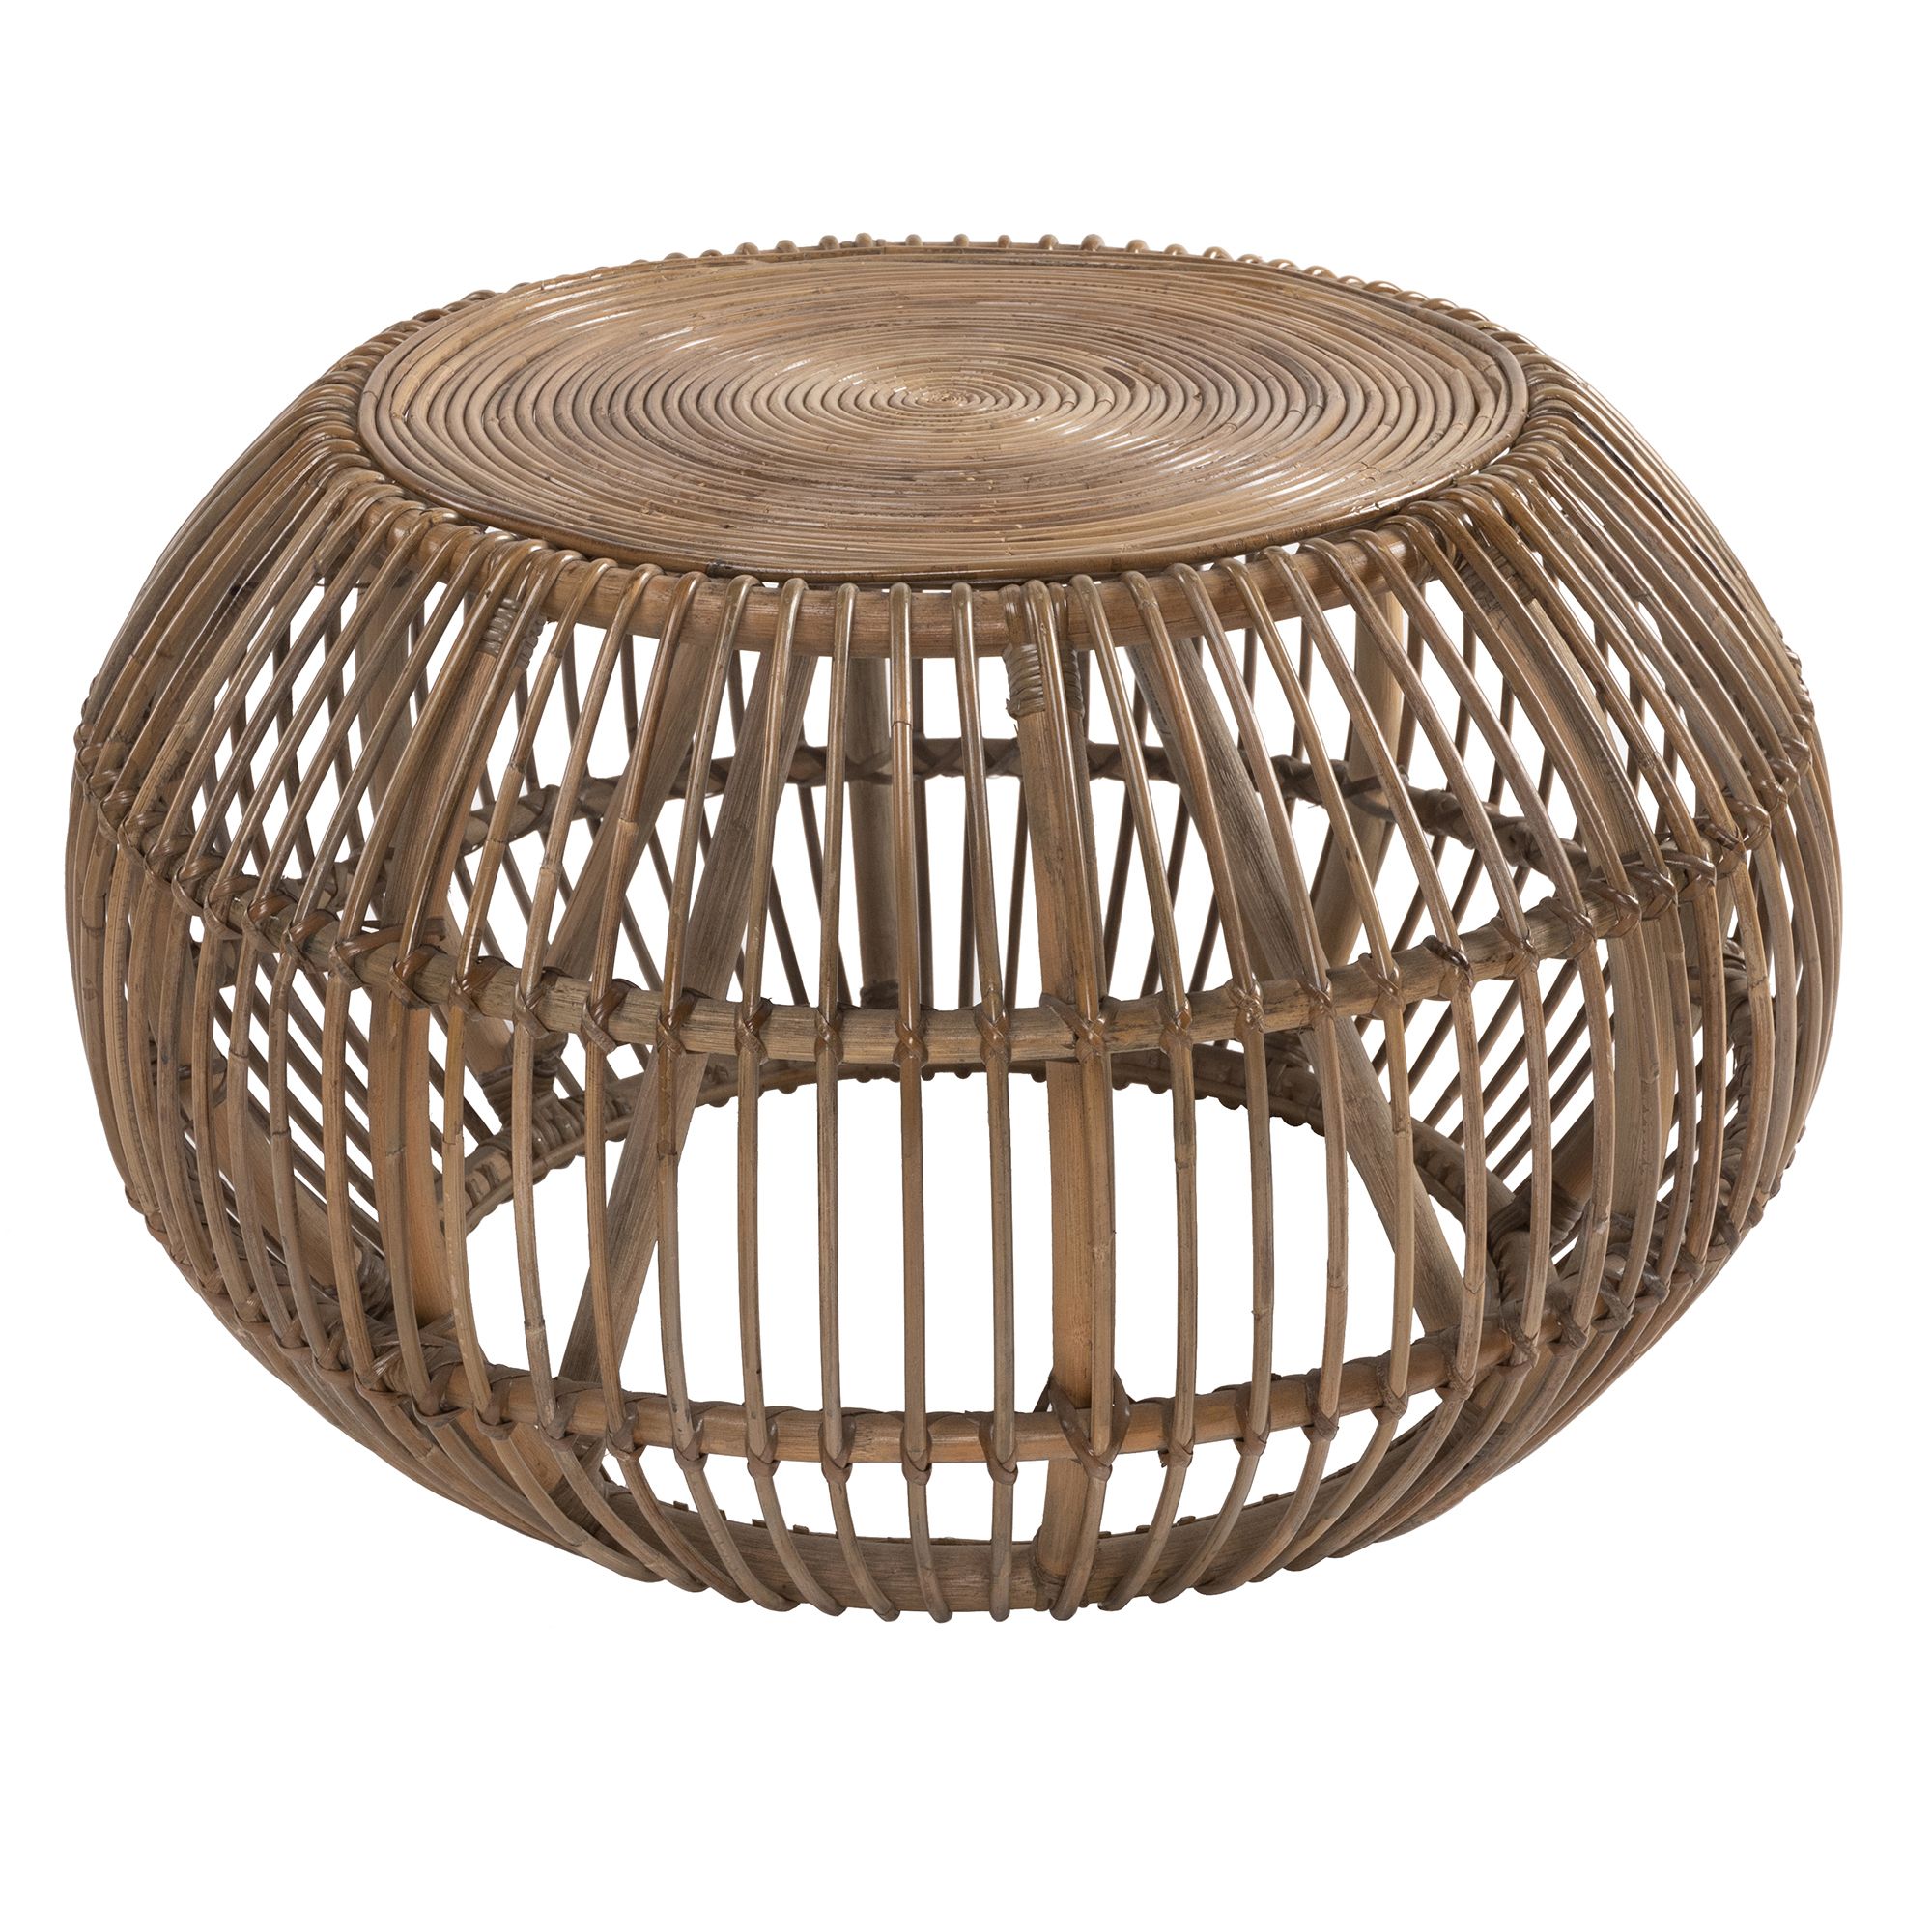 Handwoven Round Rattan Coffee Table With Concentric Circle Intended For 2019 Wicker Coffee Tables (Gallery 1 of 20)